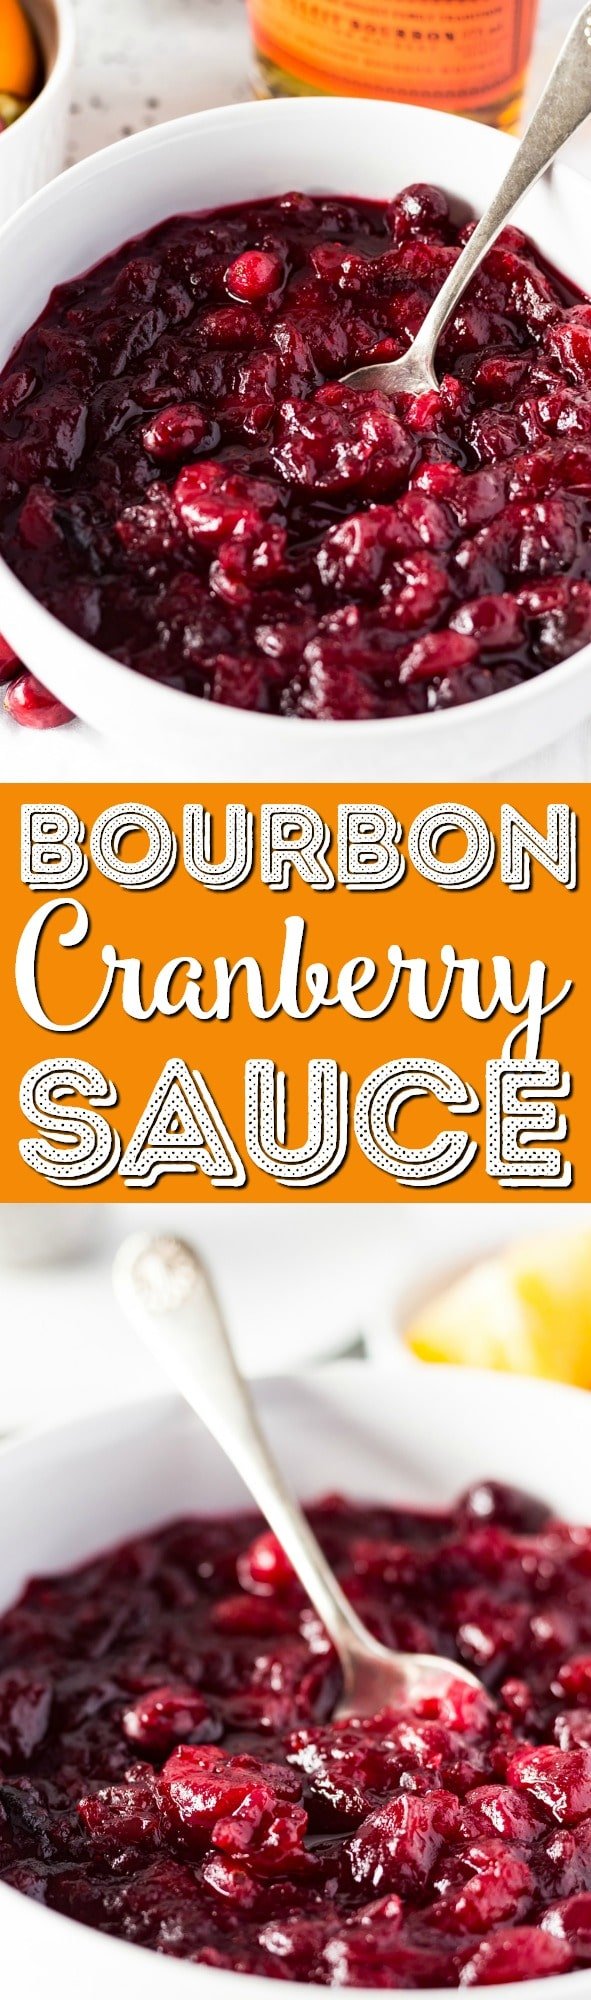 This Bourbon Orange Cranberry Sauce is loaded with tart and zesty flavor! Made with fresh cranberries, orange juice, orange zest, and bourbon on the stove and ready in less than 30 minutes. via @sugarandsoulco